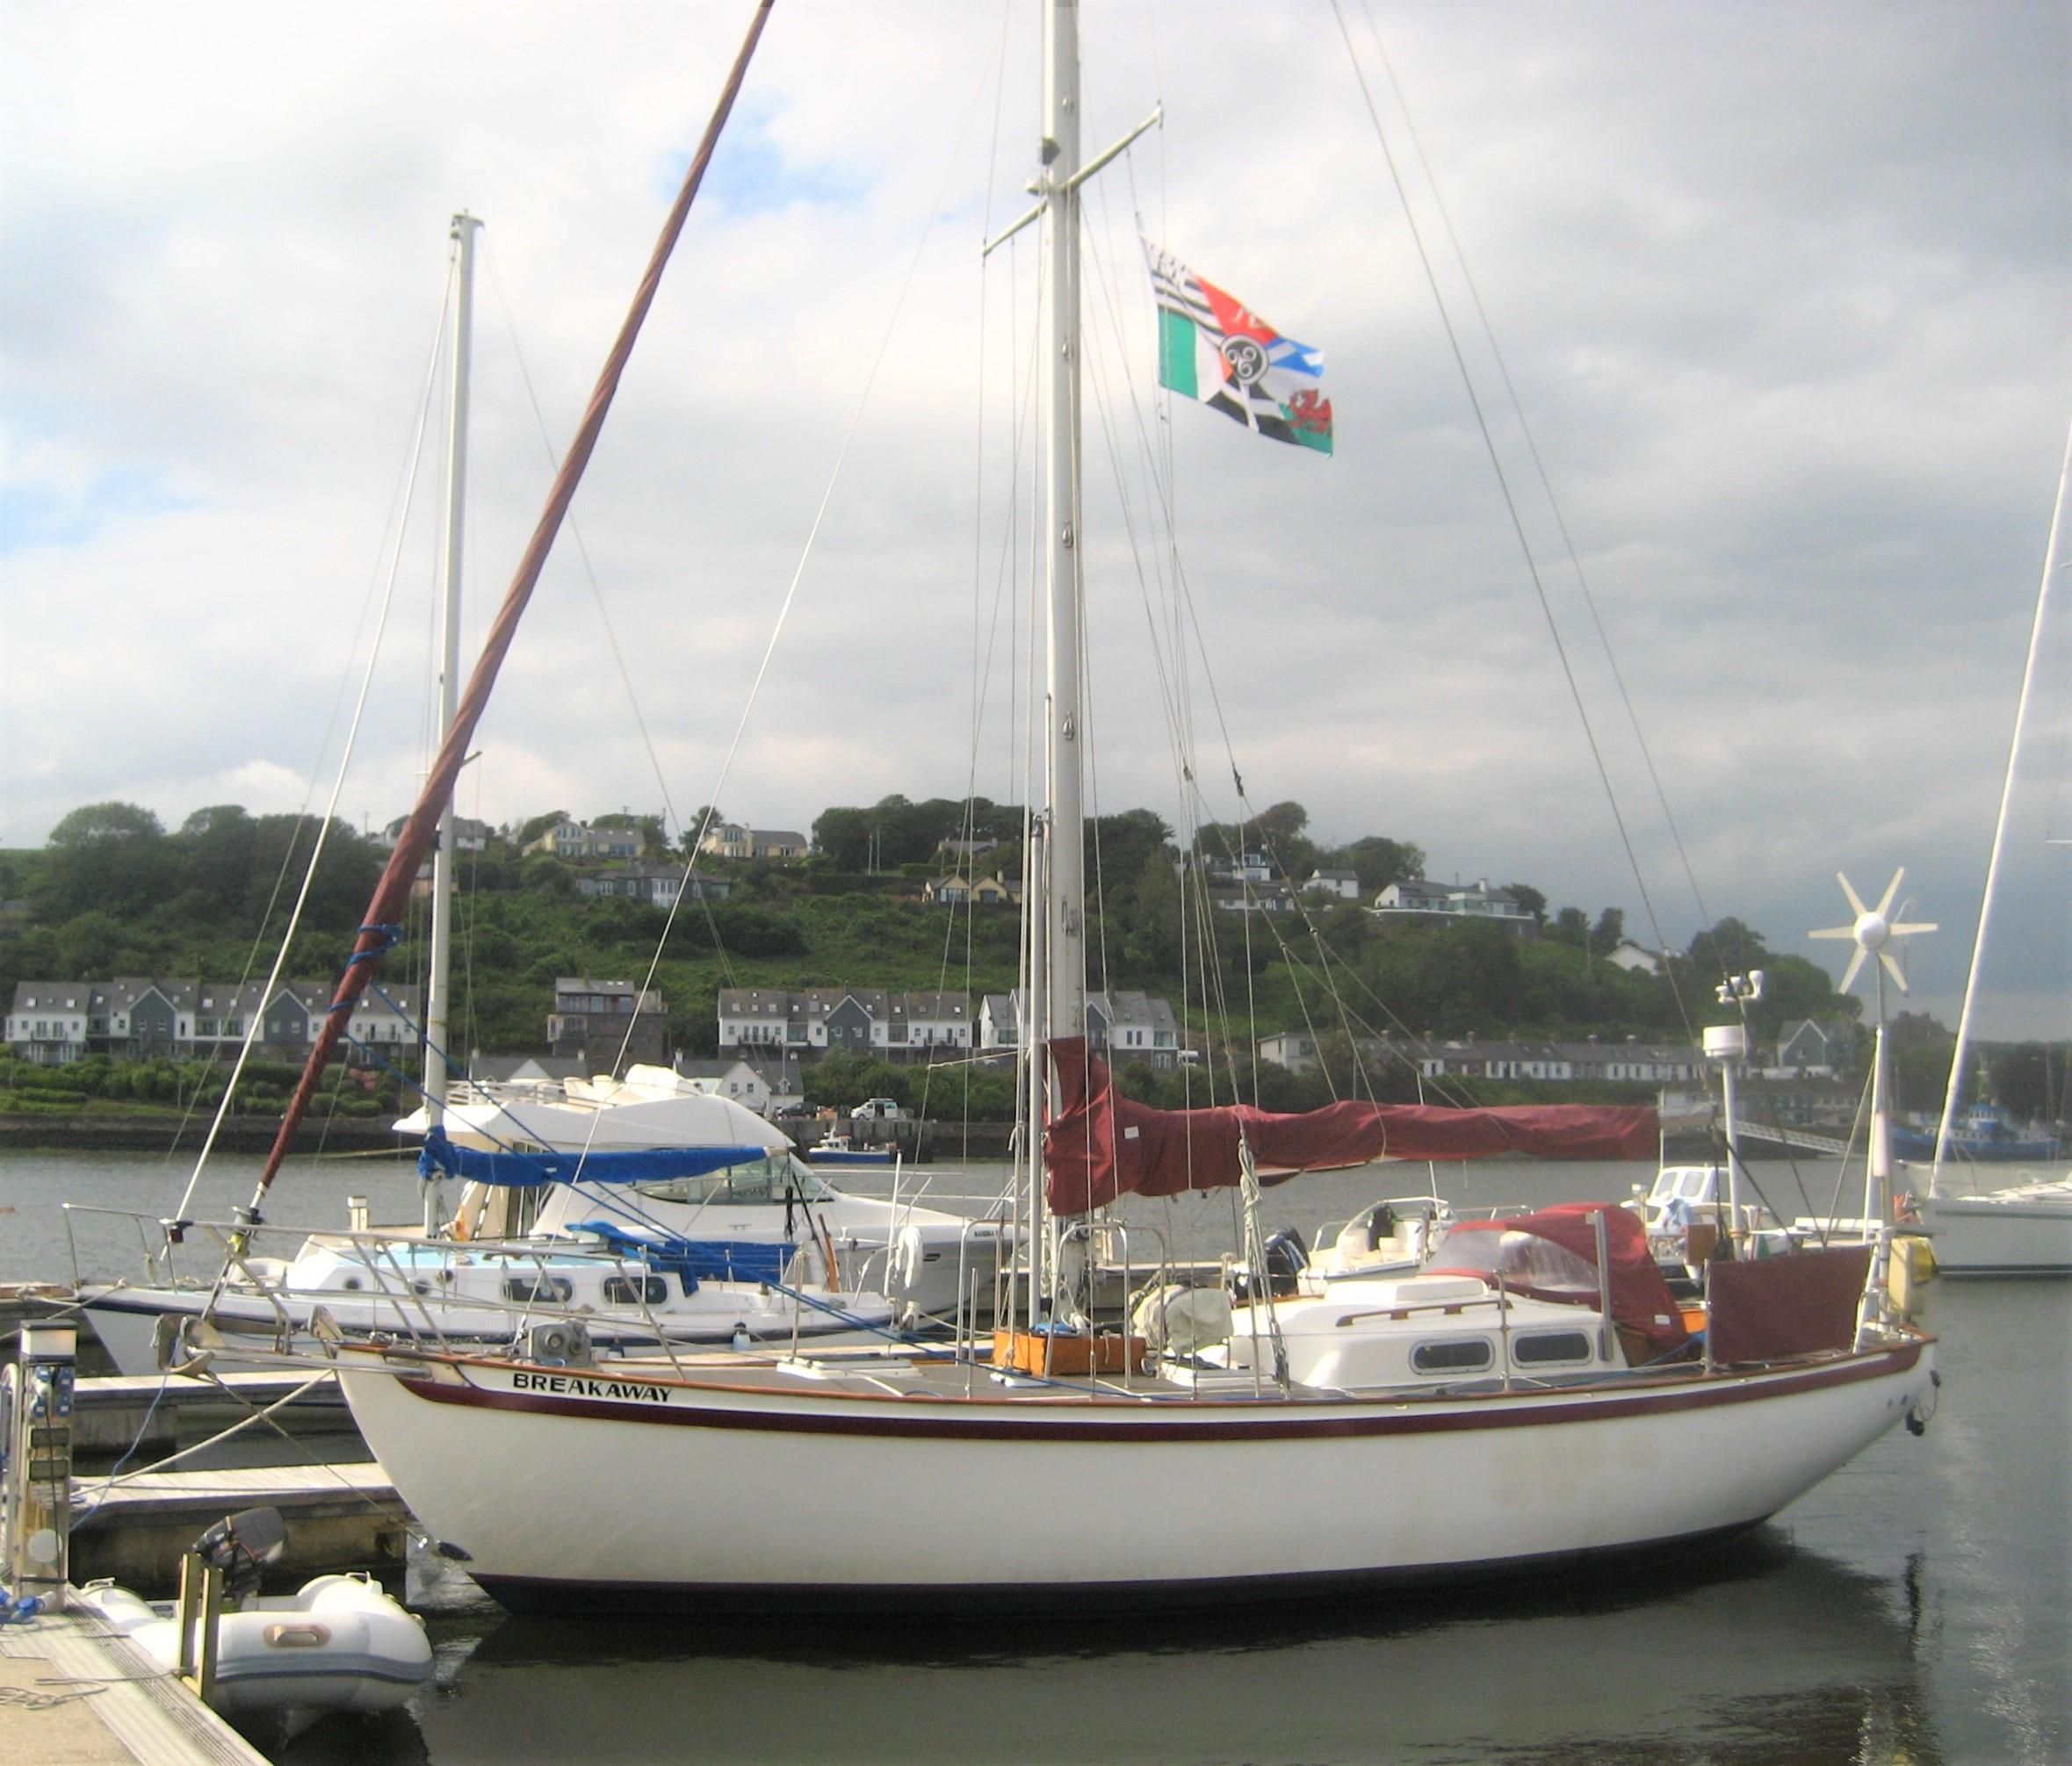 tradewind yachts for sale uk